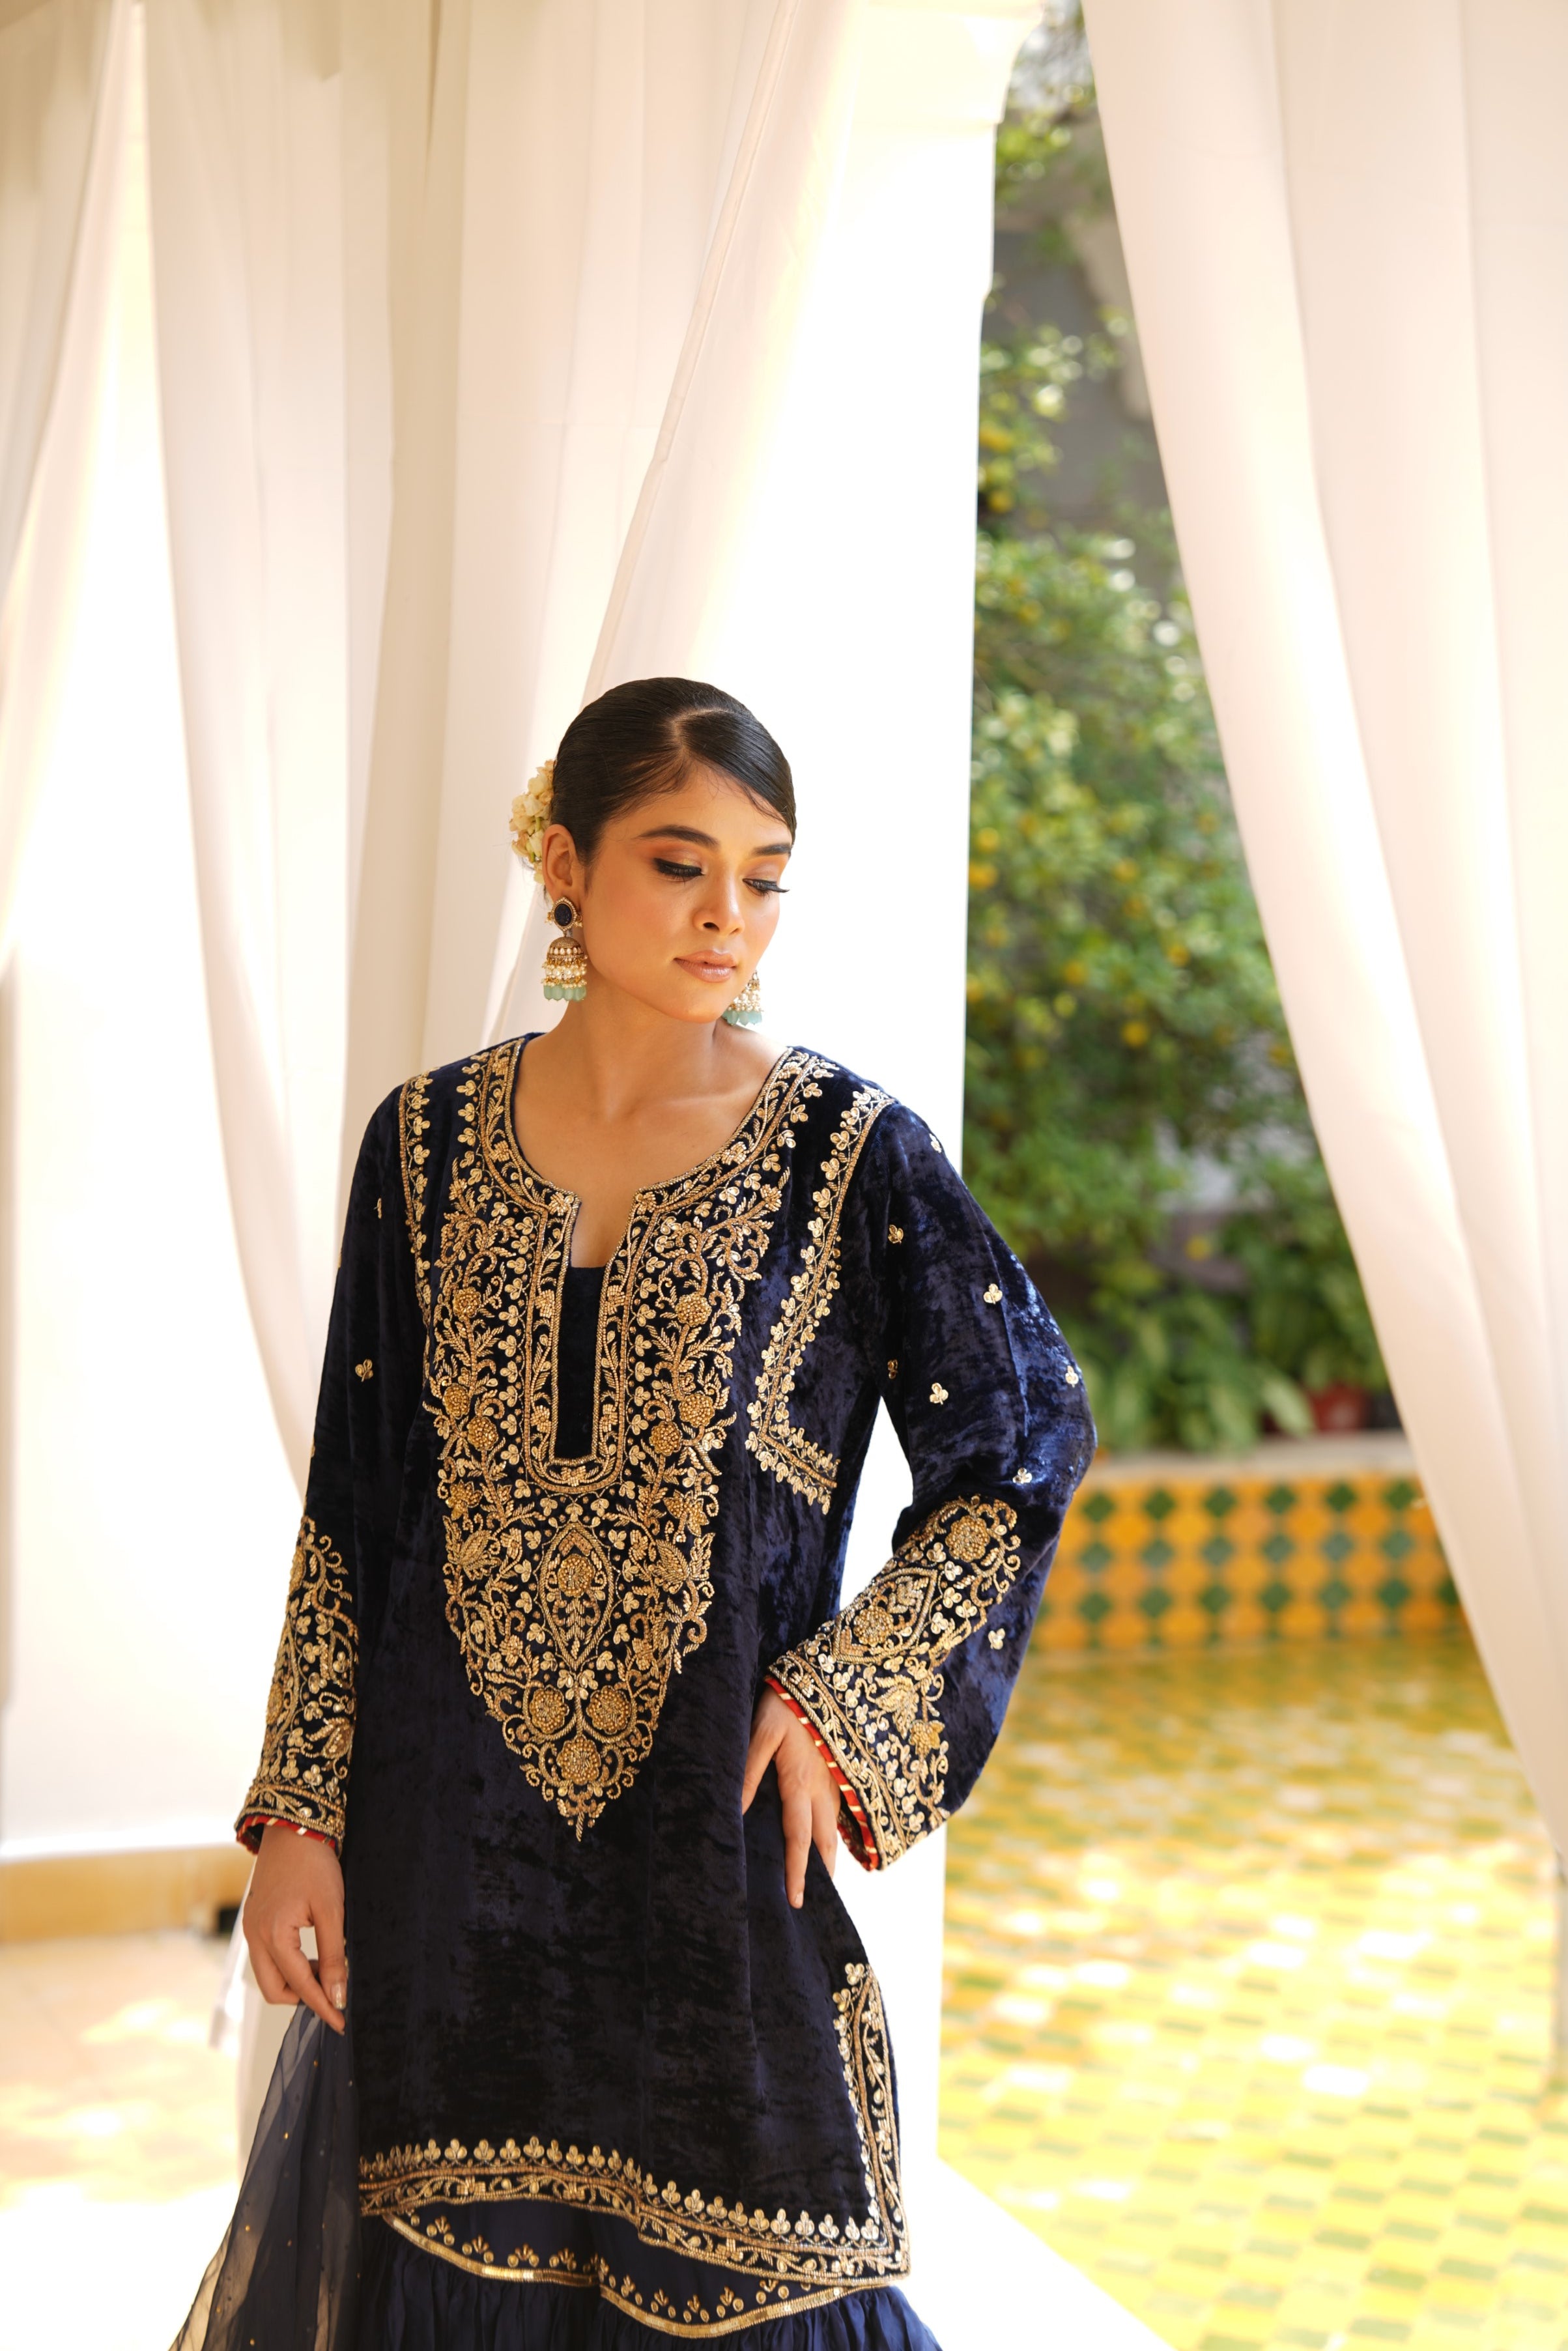 The Newest Sharara Suit will Revamp your Wardrobe in 2022